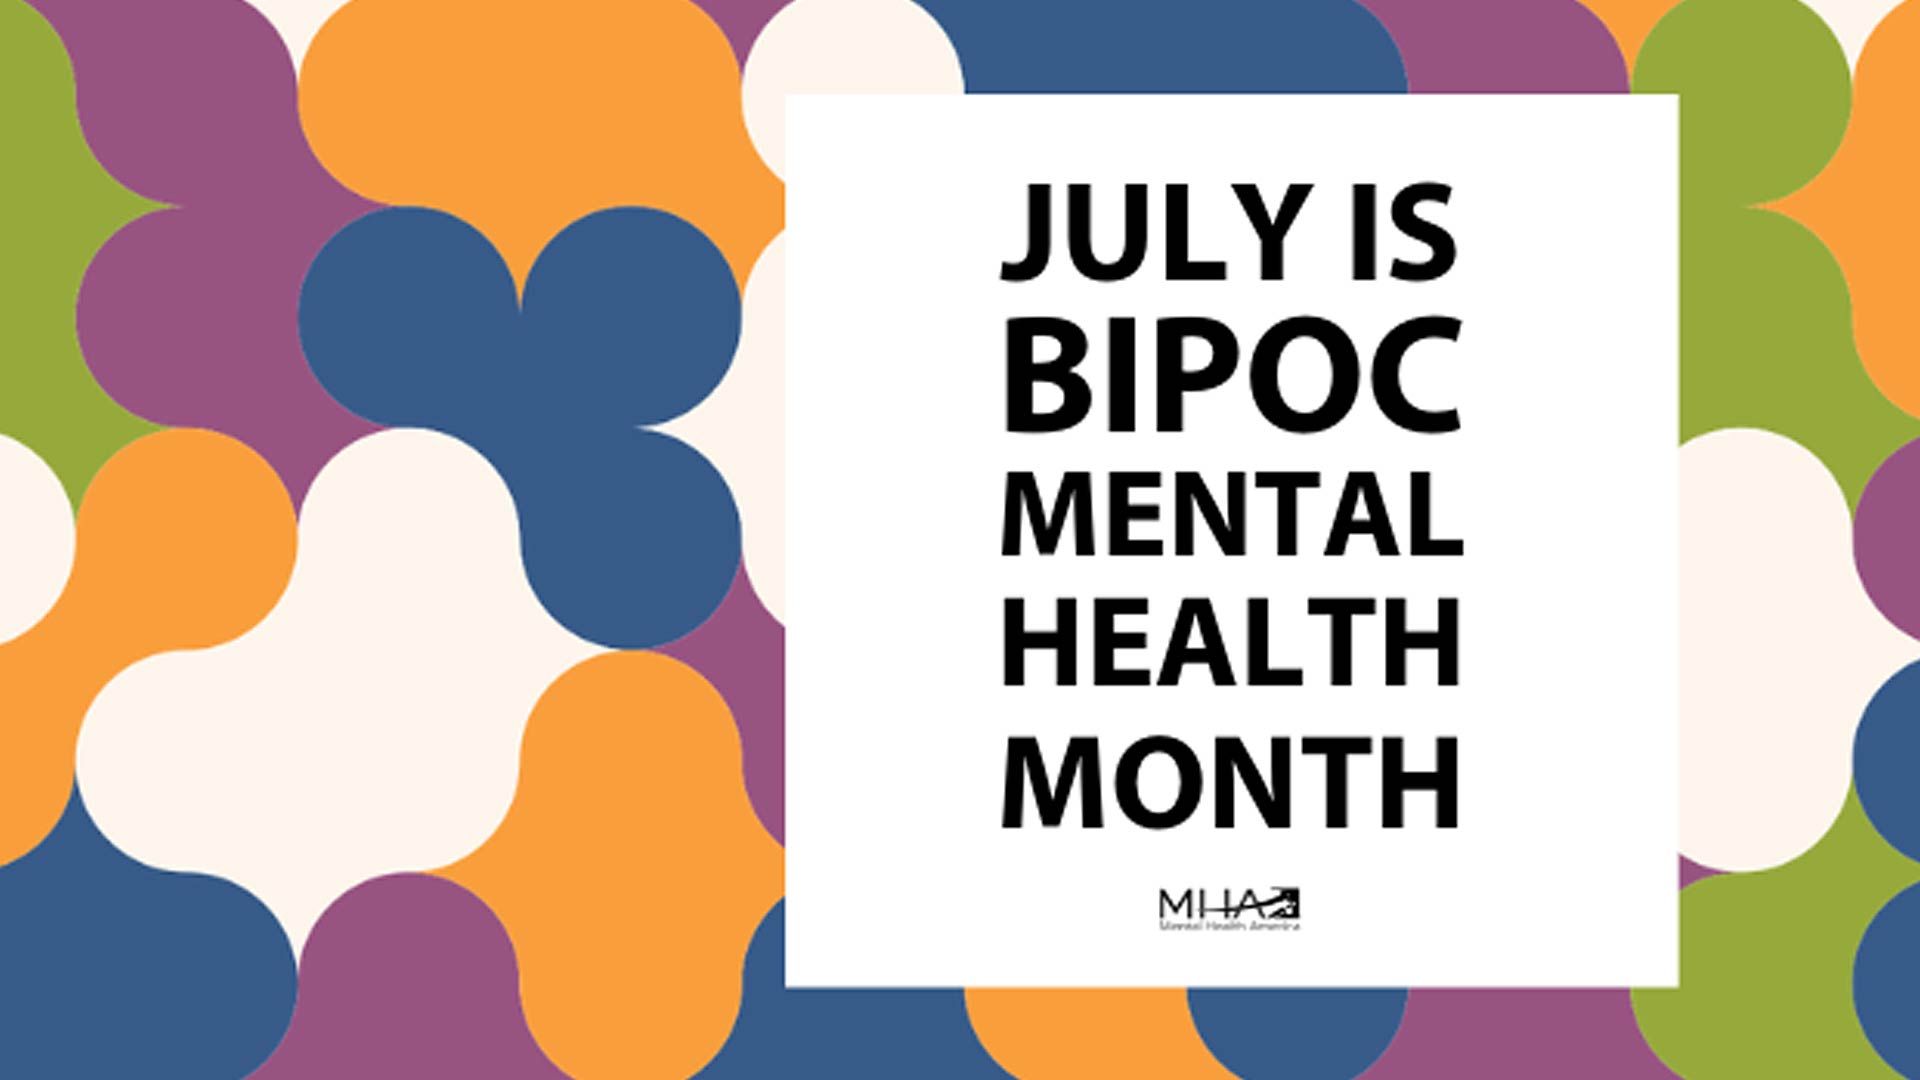 A Statement on Bipoc Mental Health Month From Jefferson Center CEO, Kiara Kuenzler